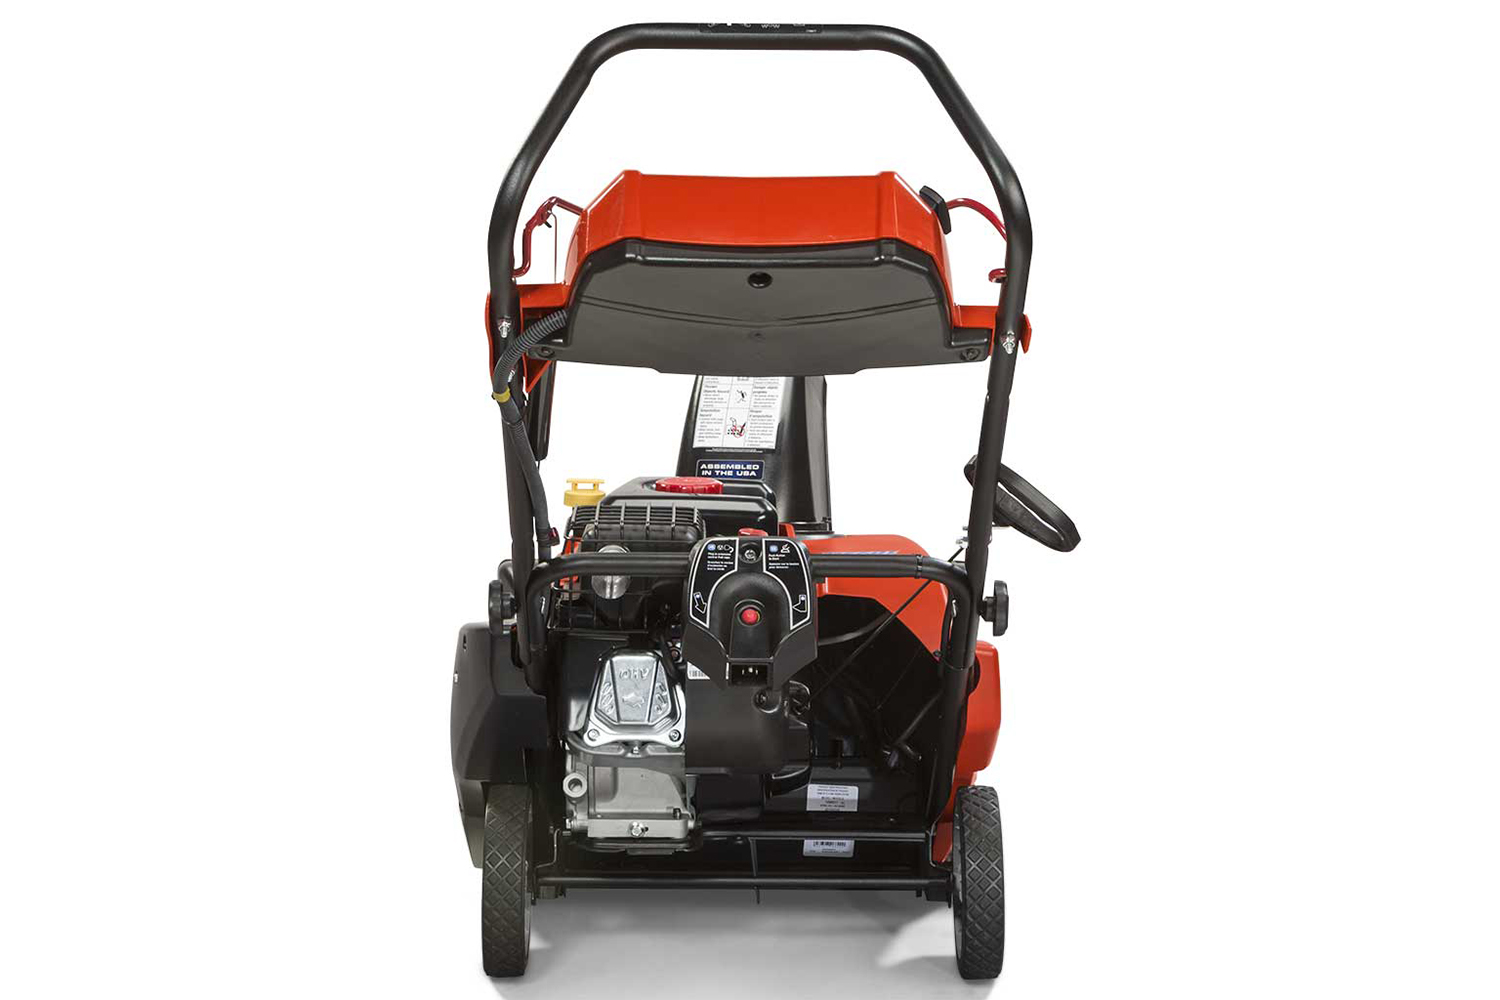 SIMPLICITY SINGLE-STAGE SNOW BLOWER WITH SNOWSHREDDER™ AUGER 1222EE<br/>*Model shown in image may vary.